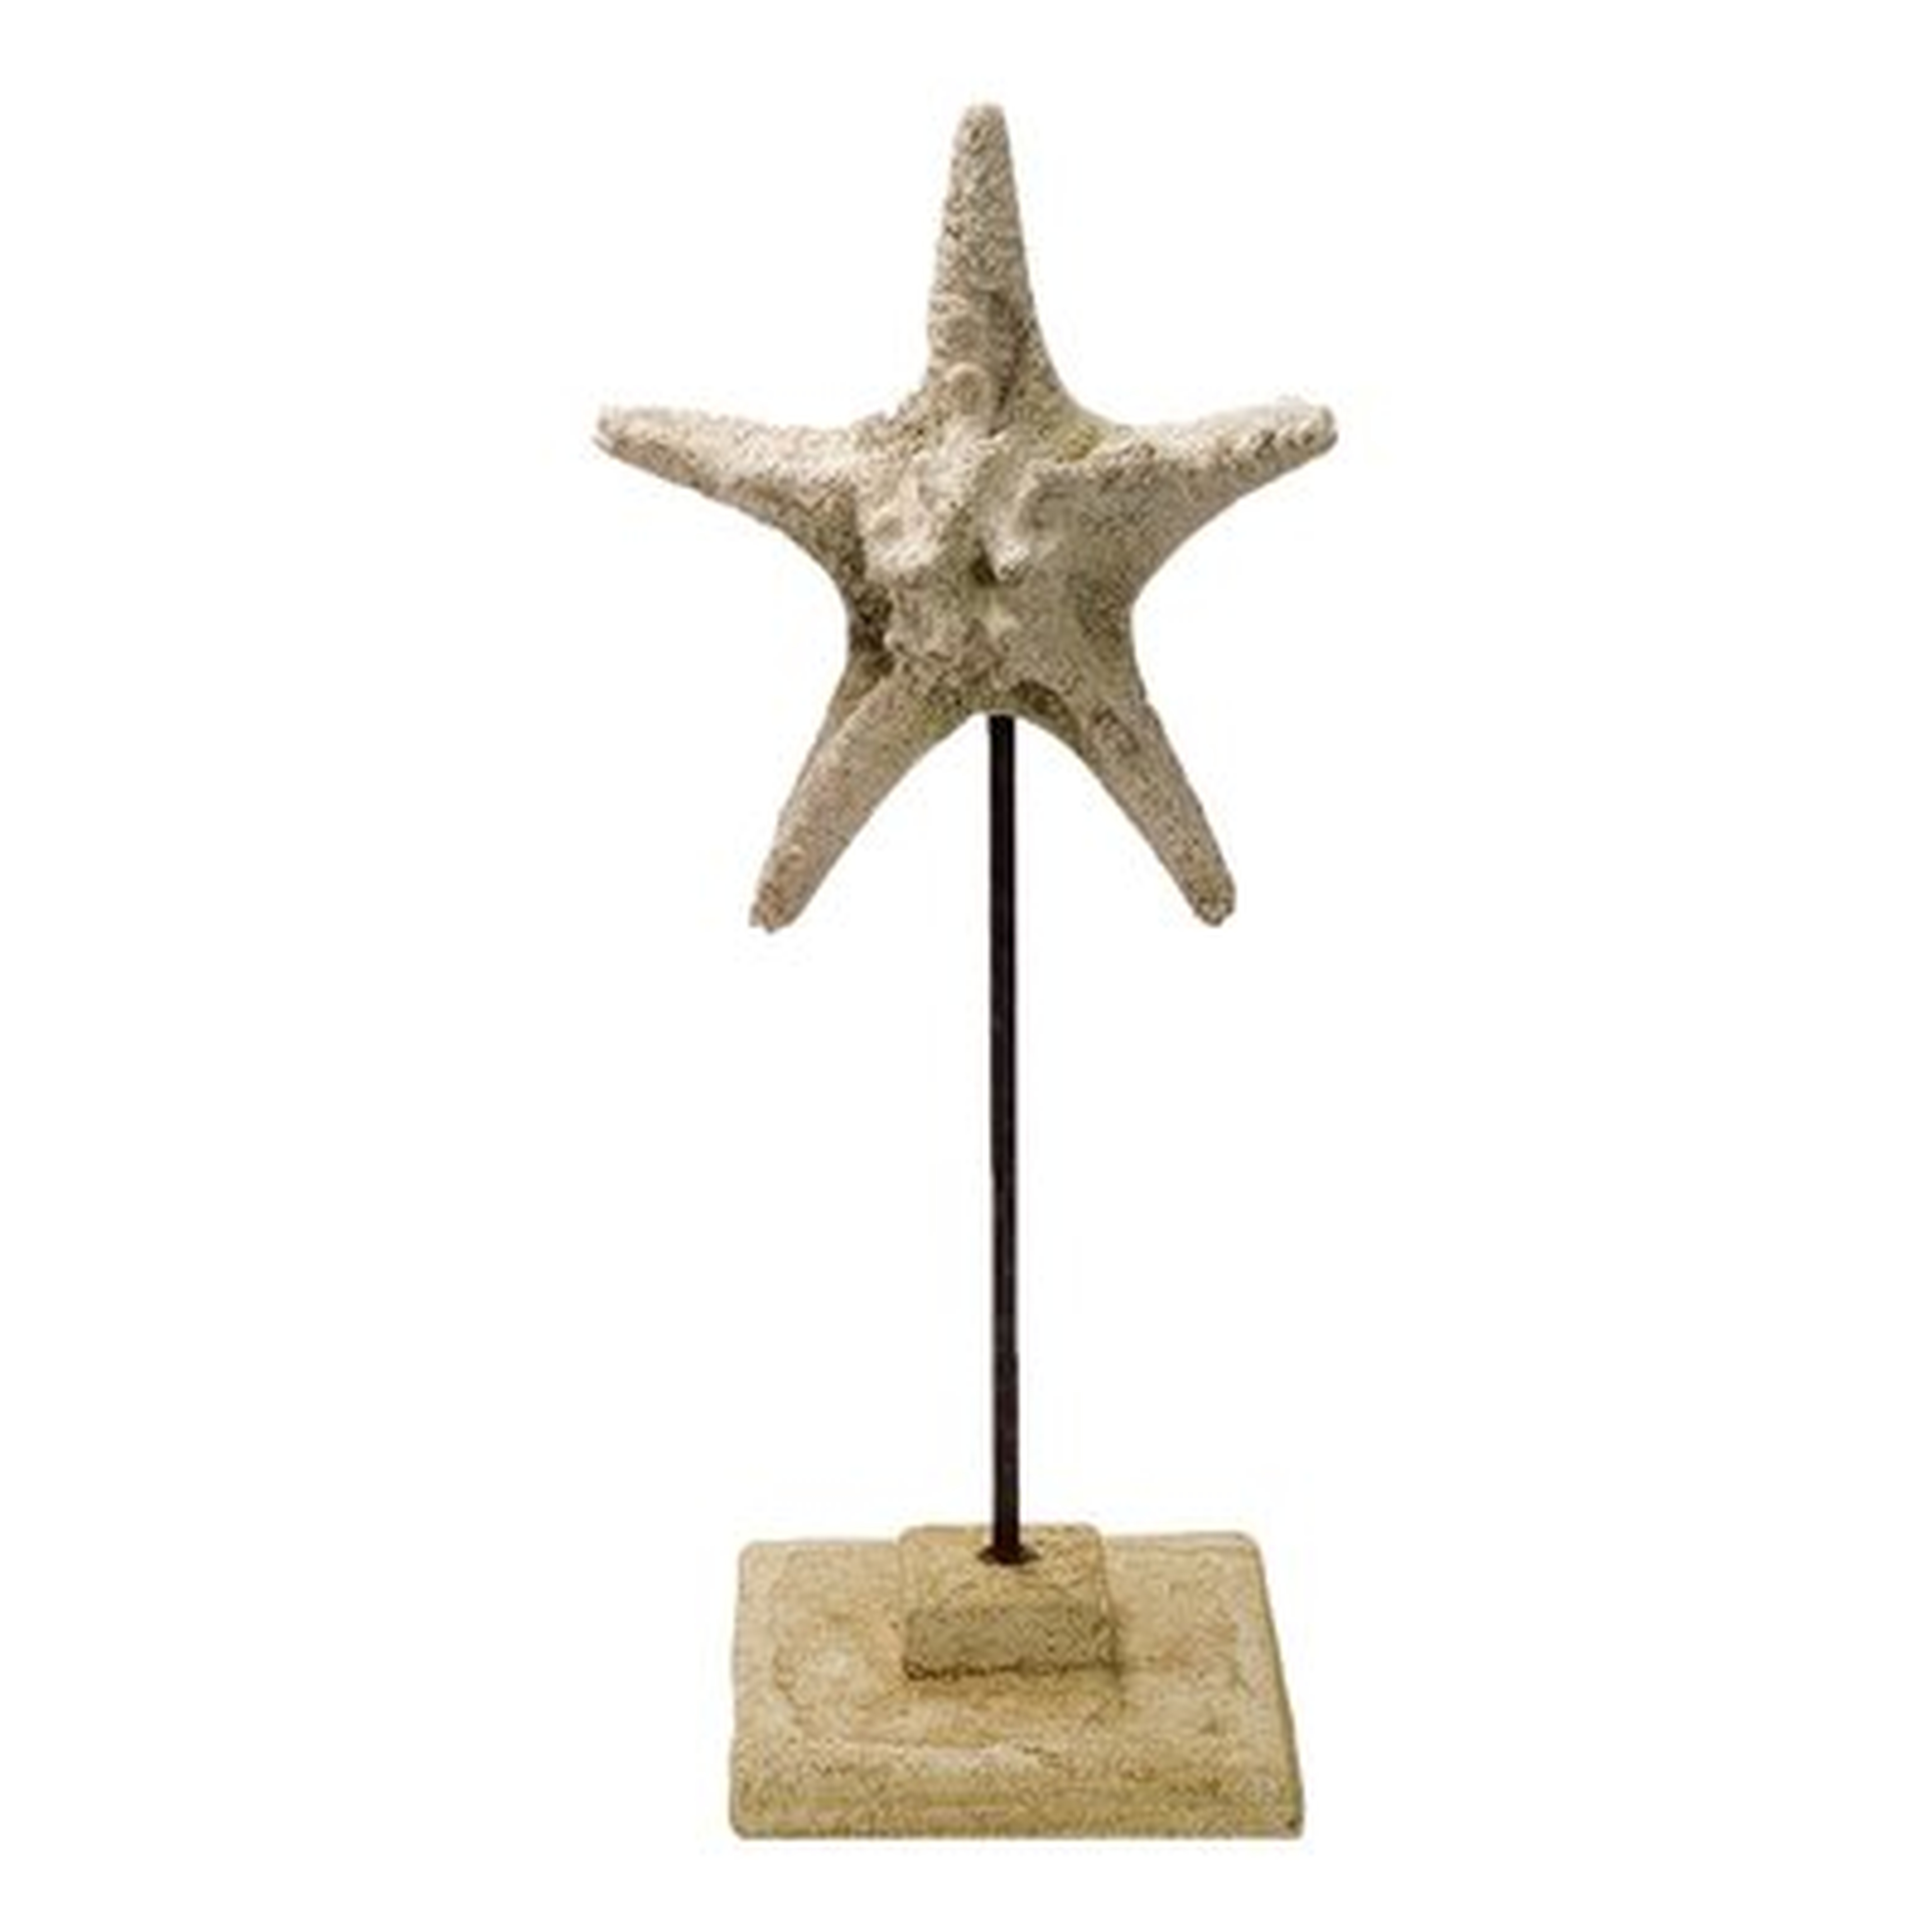 Cifuentes Stone Cast Star Fish on Stand Sculpture - Wayfair